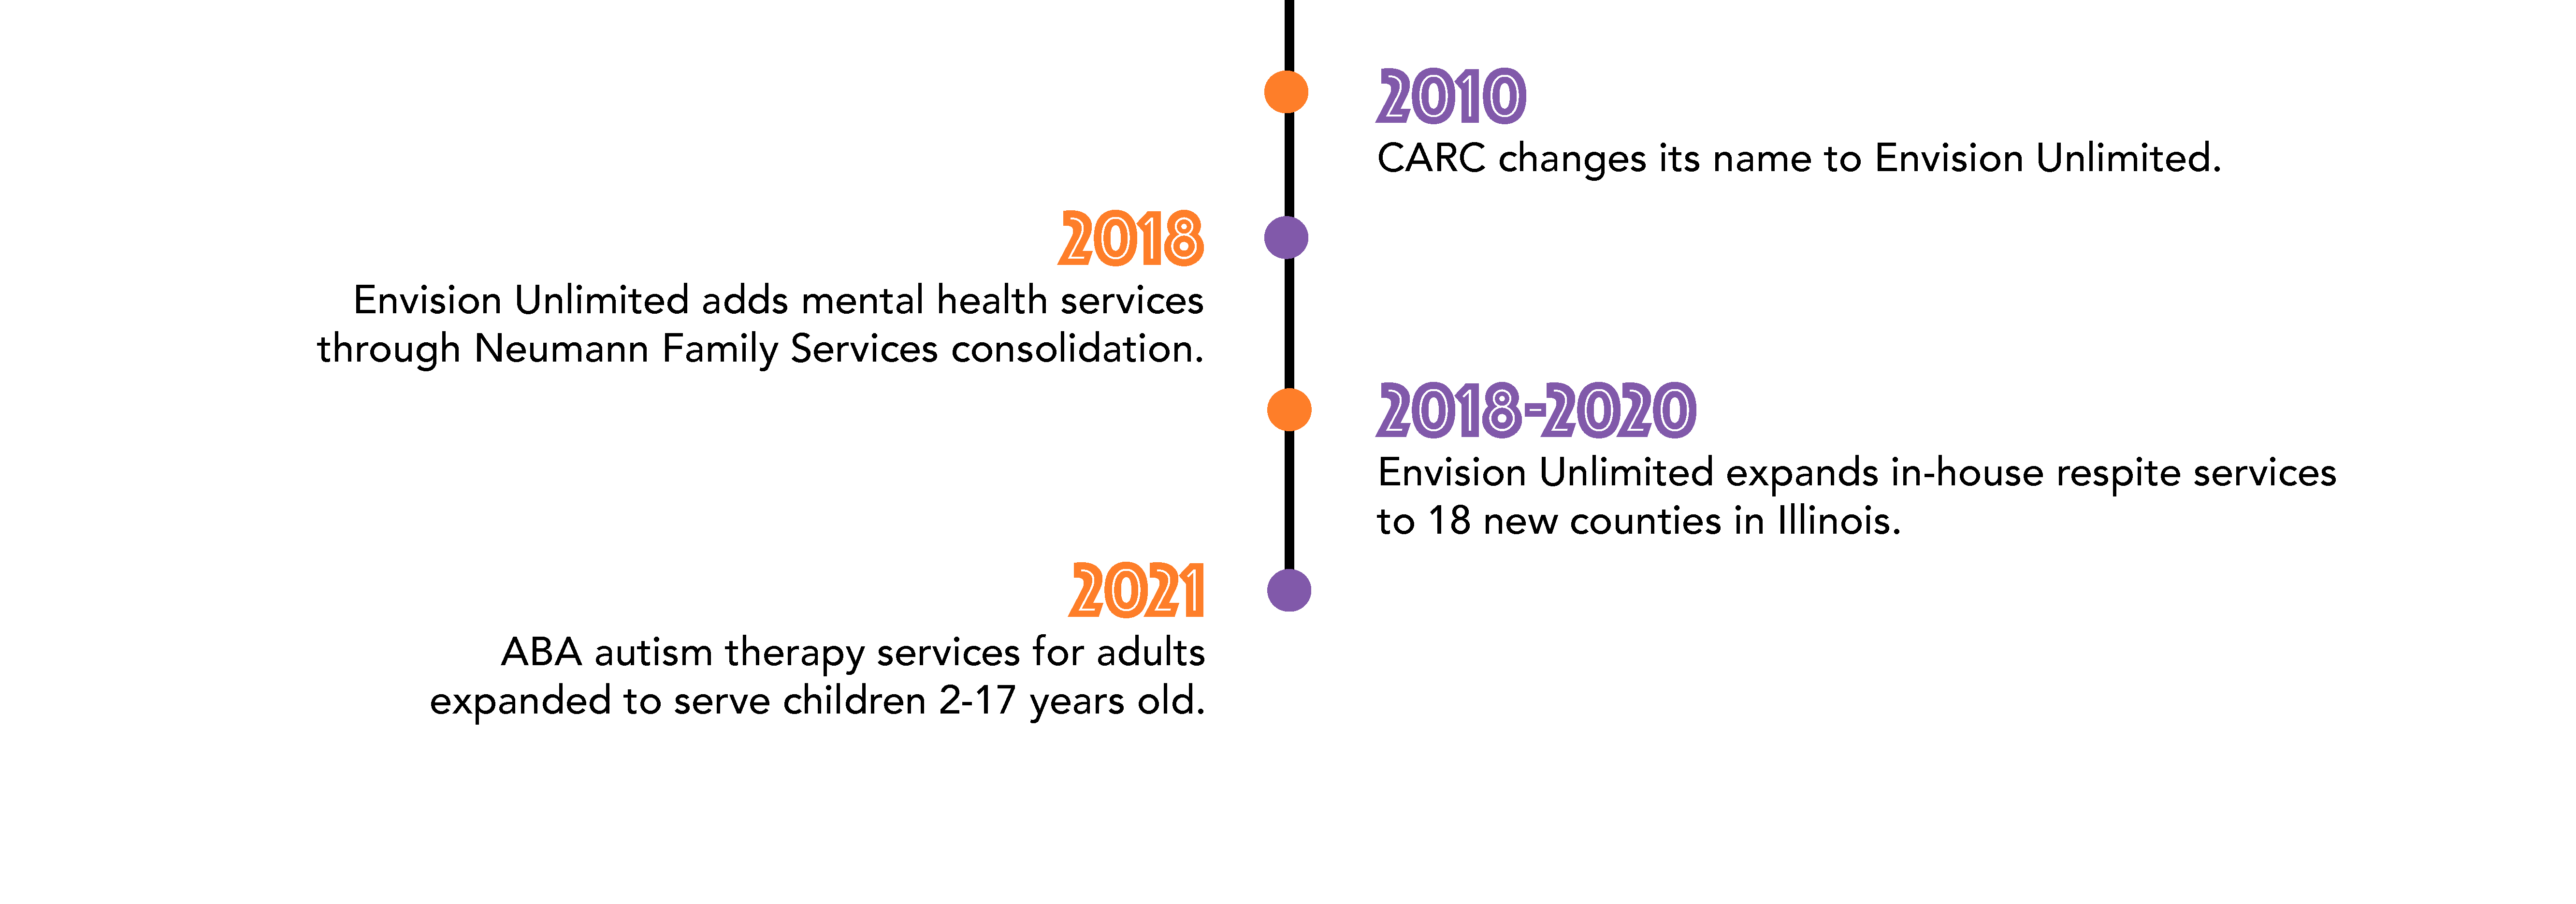 In 2010, CARC changes name to Envision Unlimited. In 2018, the organization adds mental health services through a consolidation with Neumann Family Services. Since 2018, Envision Unlimited has expanded in-house respite services to 18 new counties in Illinois.